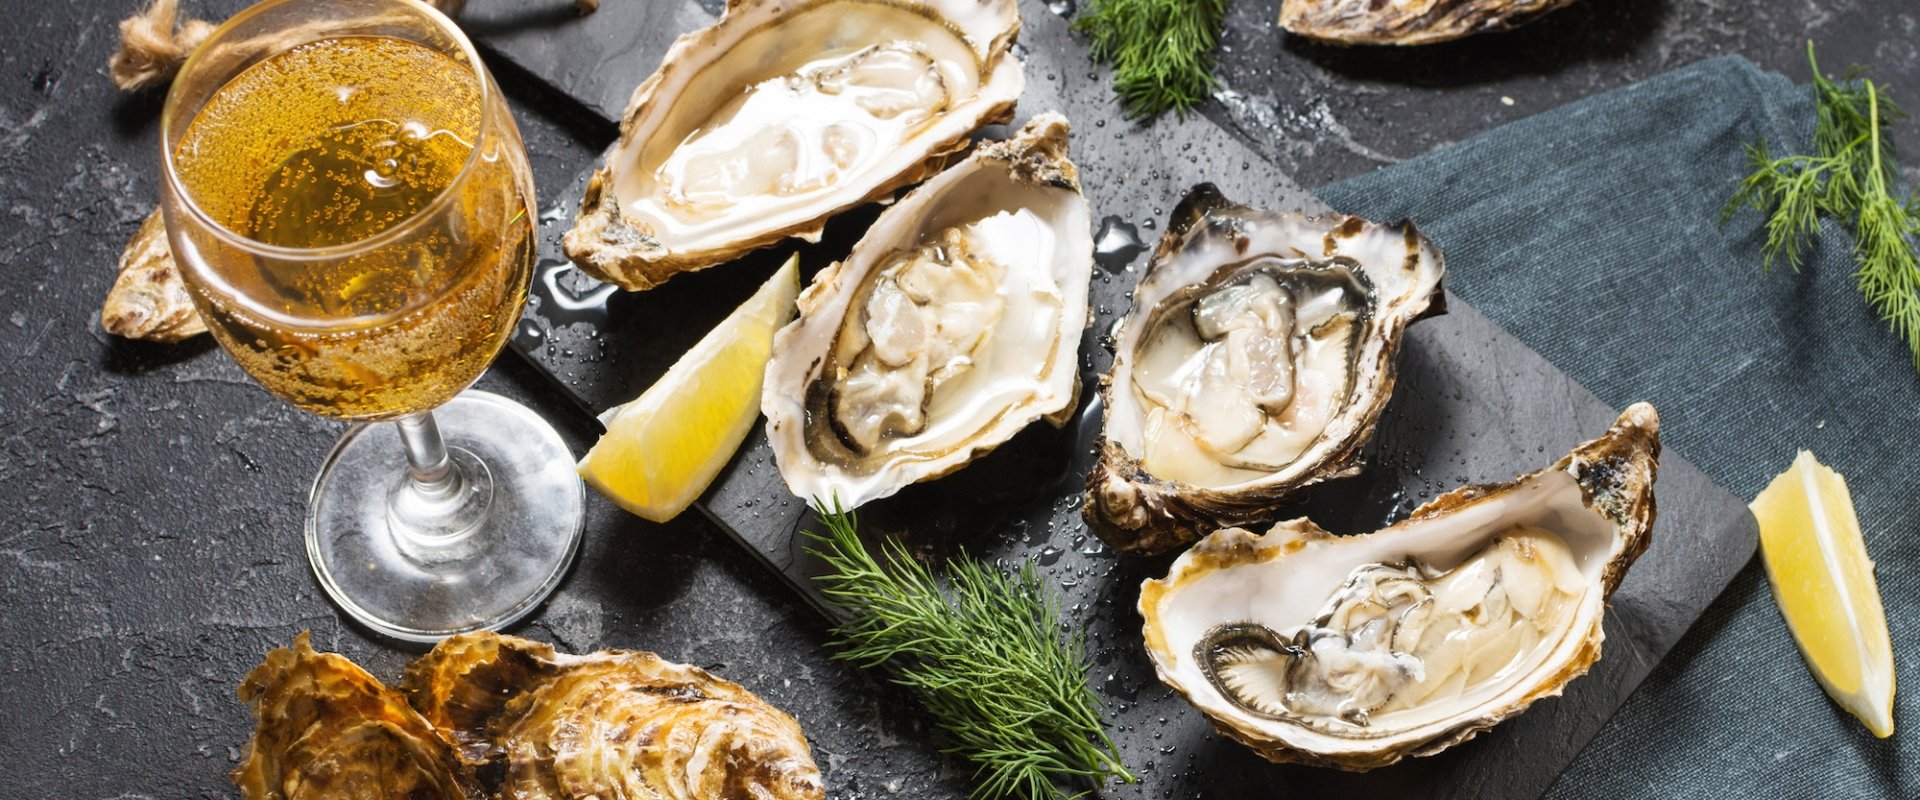 A plate of fresh oysters accompanies by a glass of wine